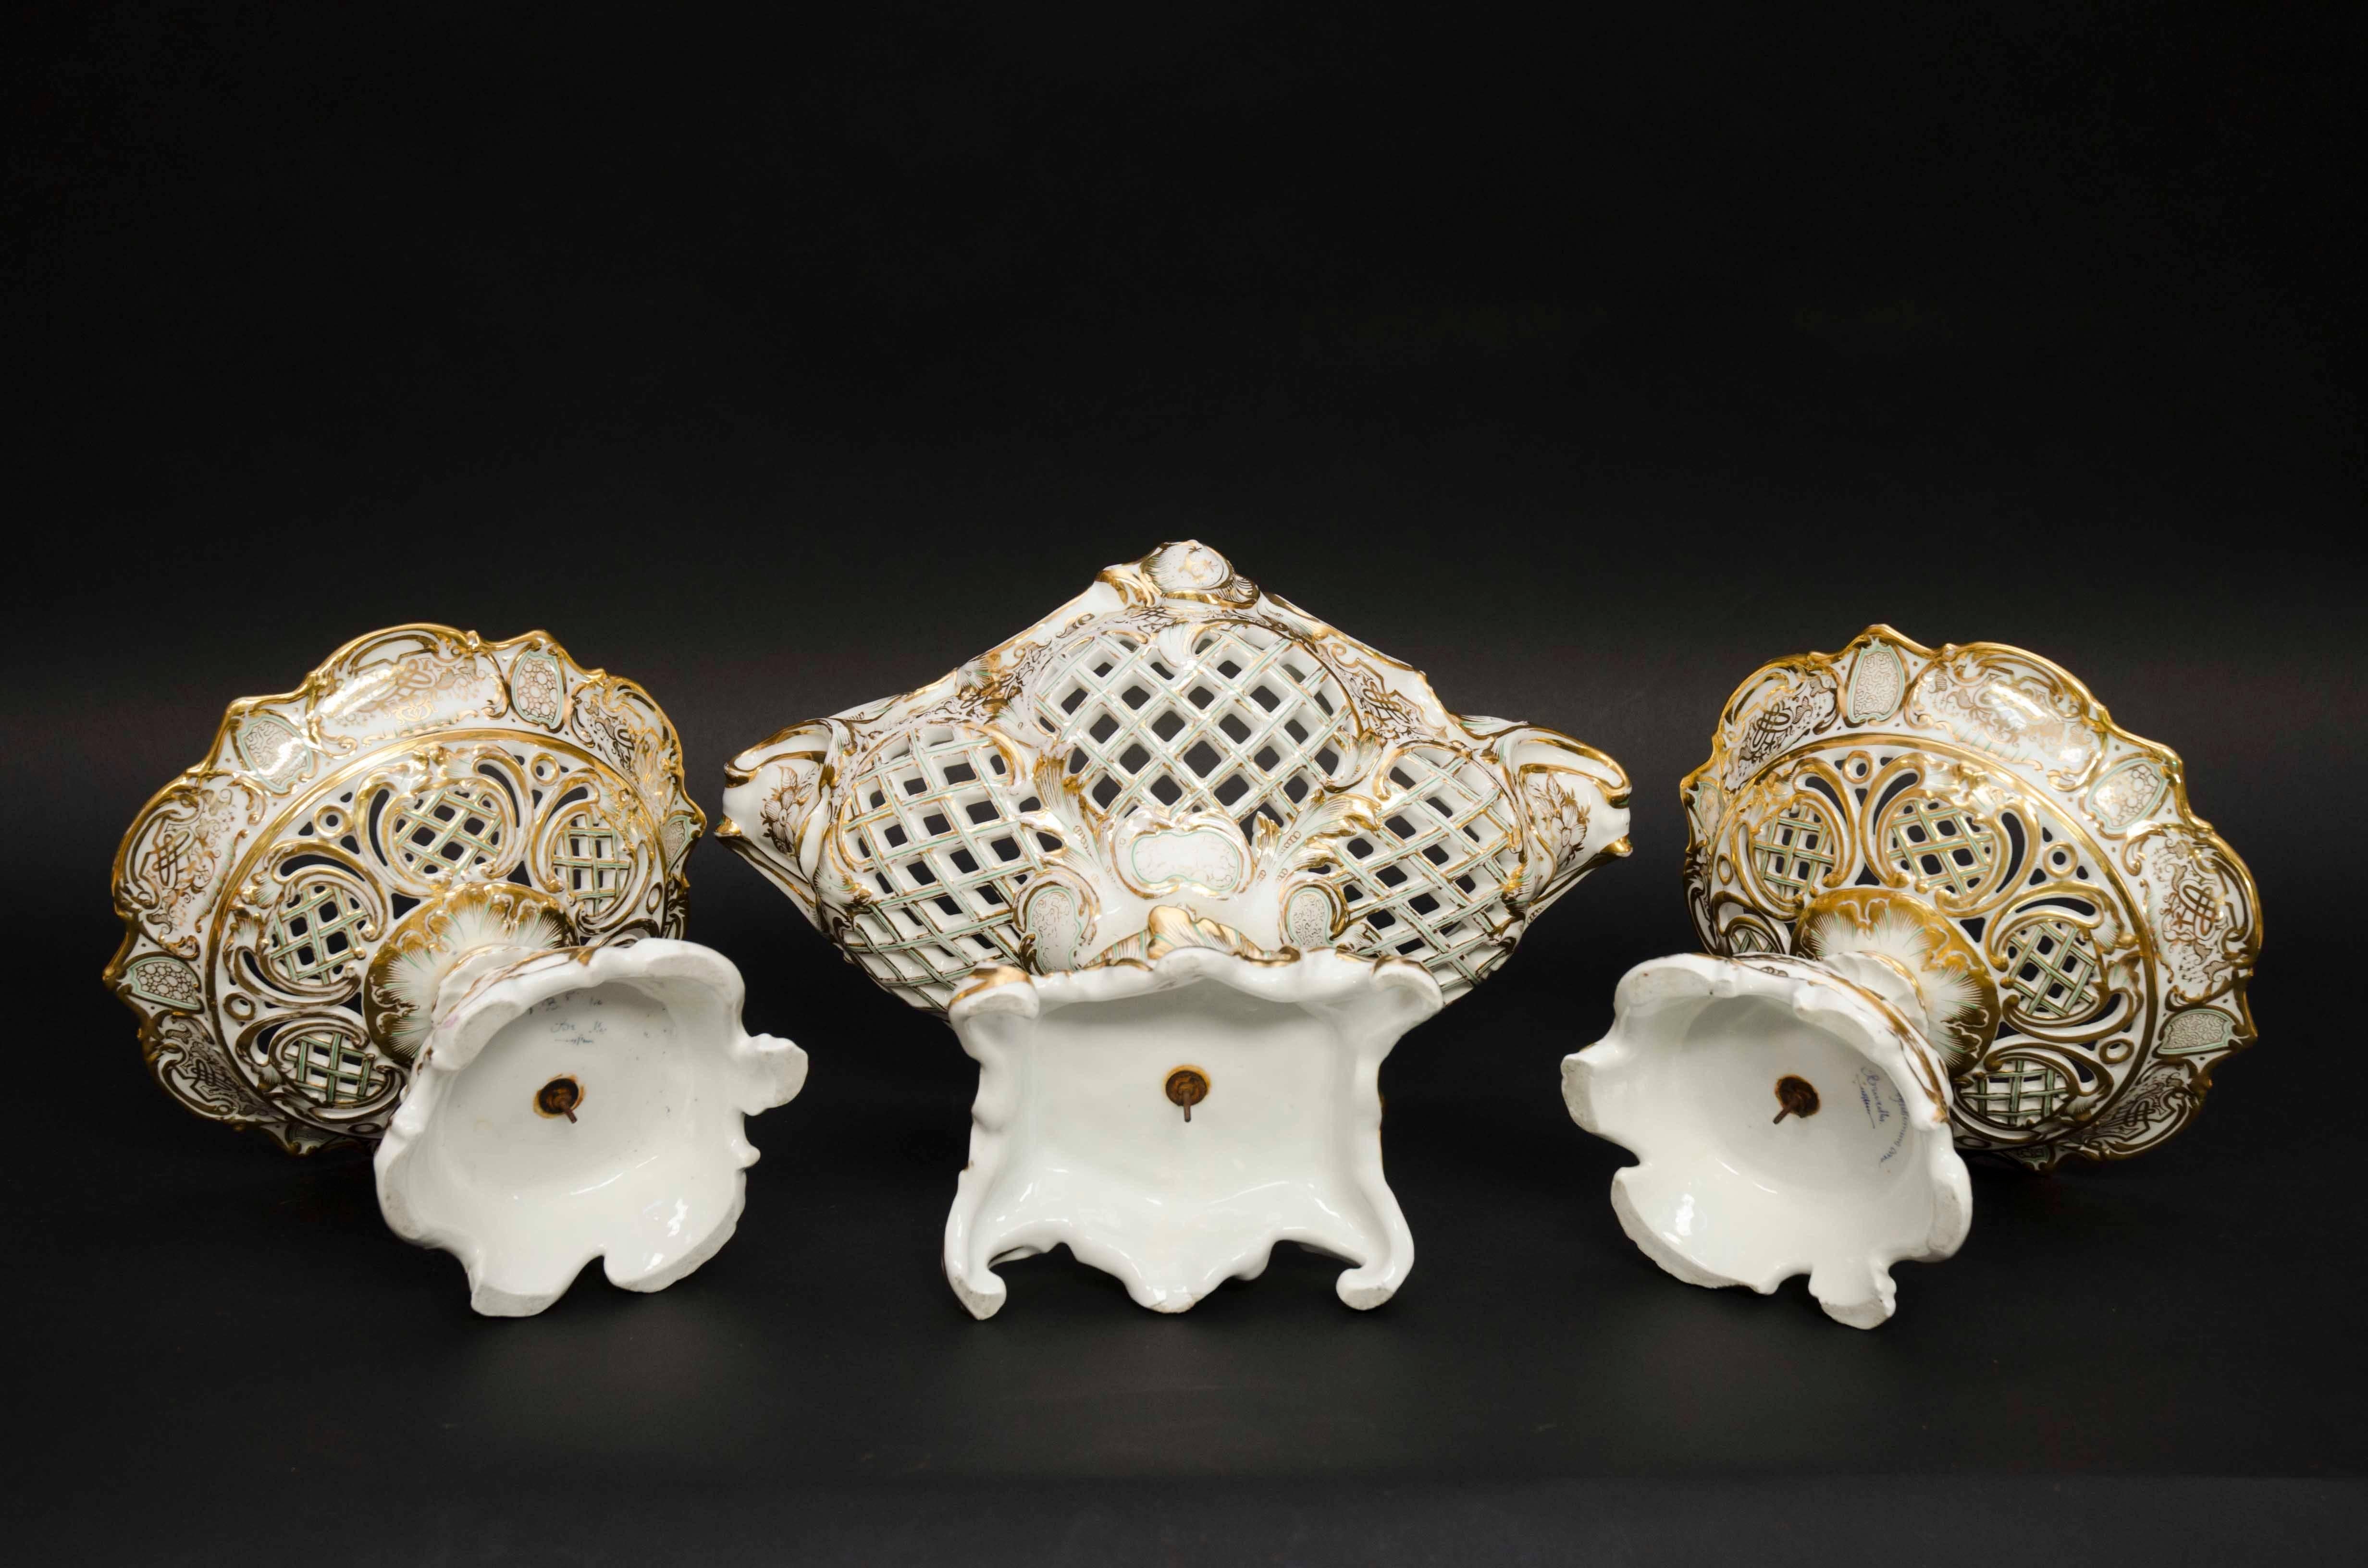 19th Century Rococo Garniture with Three Porcelain Baskets Signed Cappellemans For Sale 5